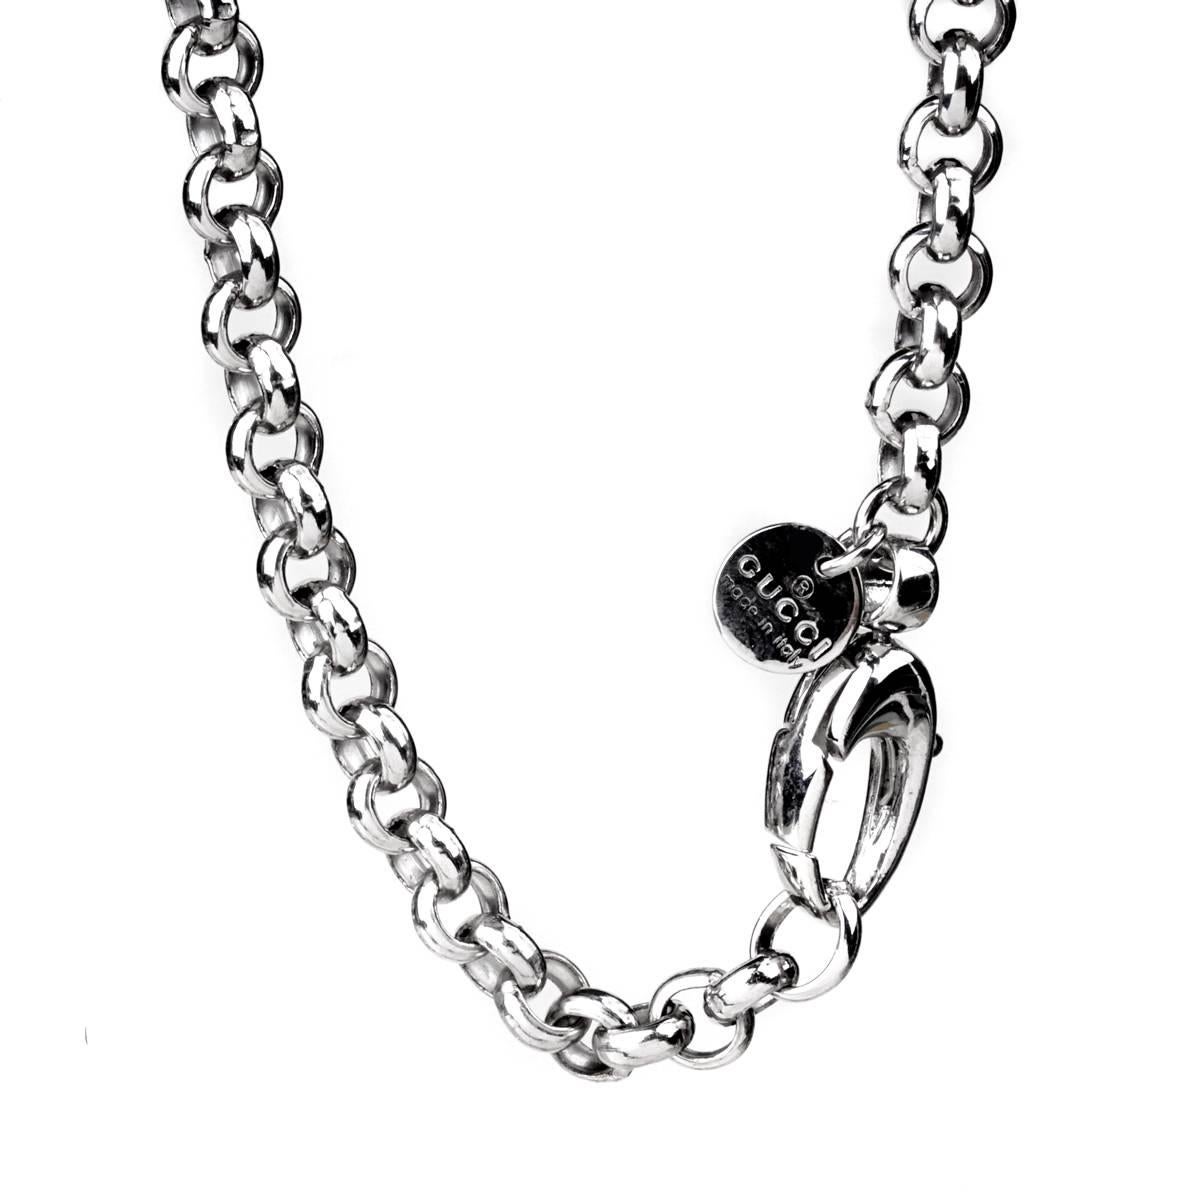 An iconic Gucci necklace showcasing the Horsebit motif finished with Diamantissima pattern in sterling silver.